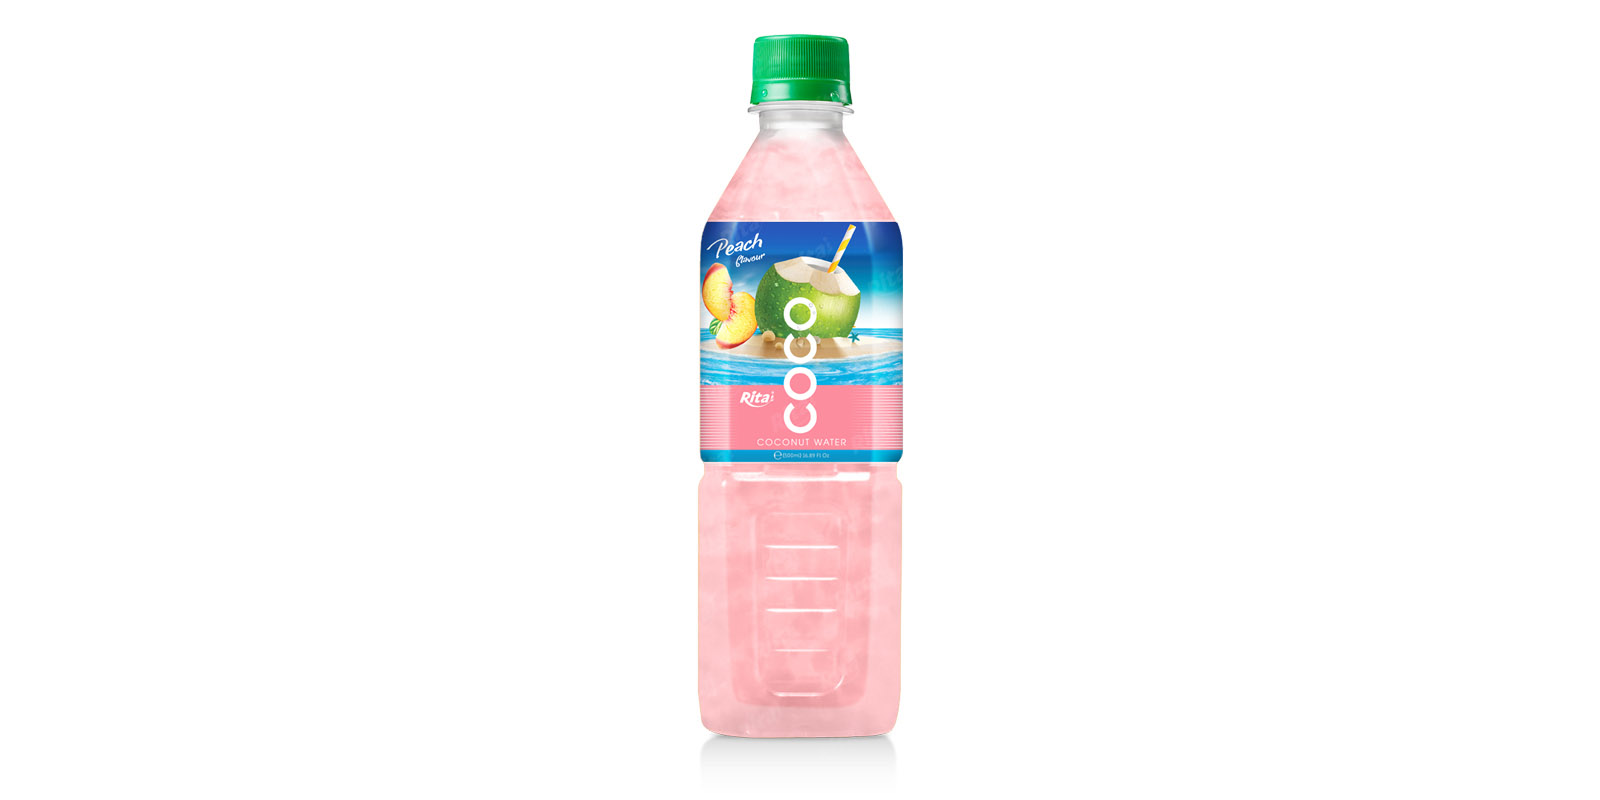 Coconut water with peach flavor  500ml Pet bottle from RITA US